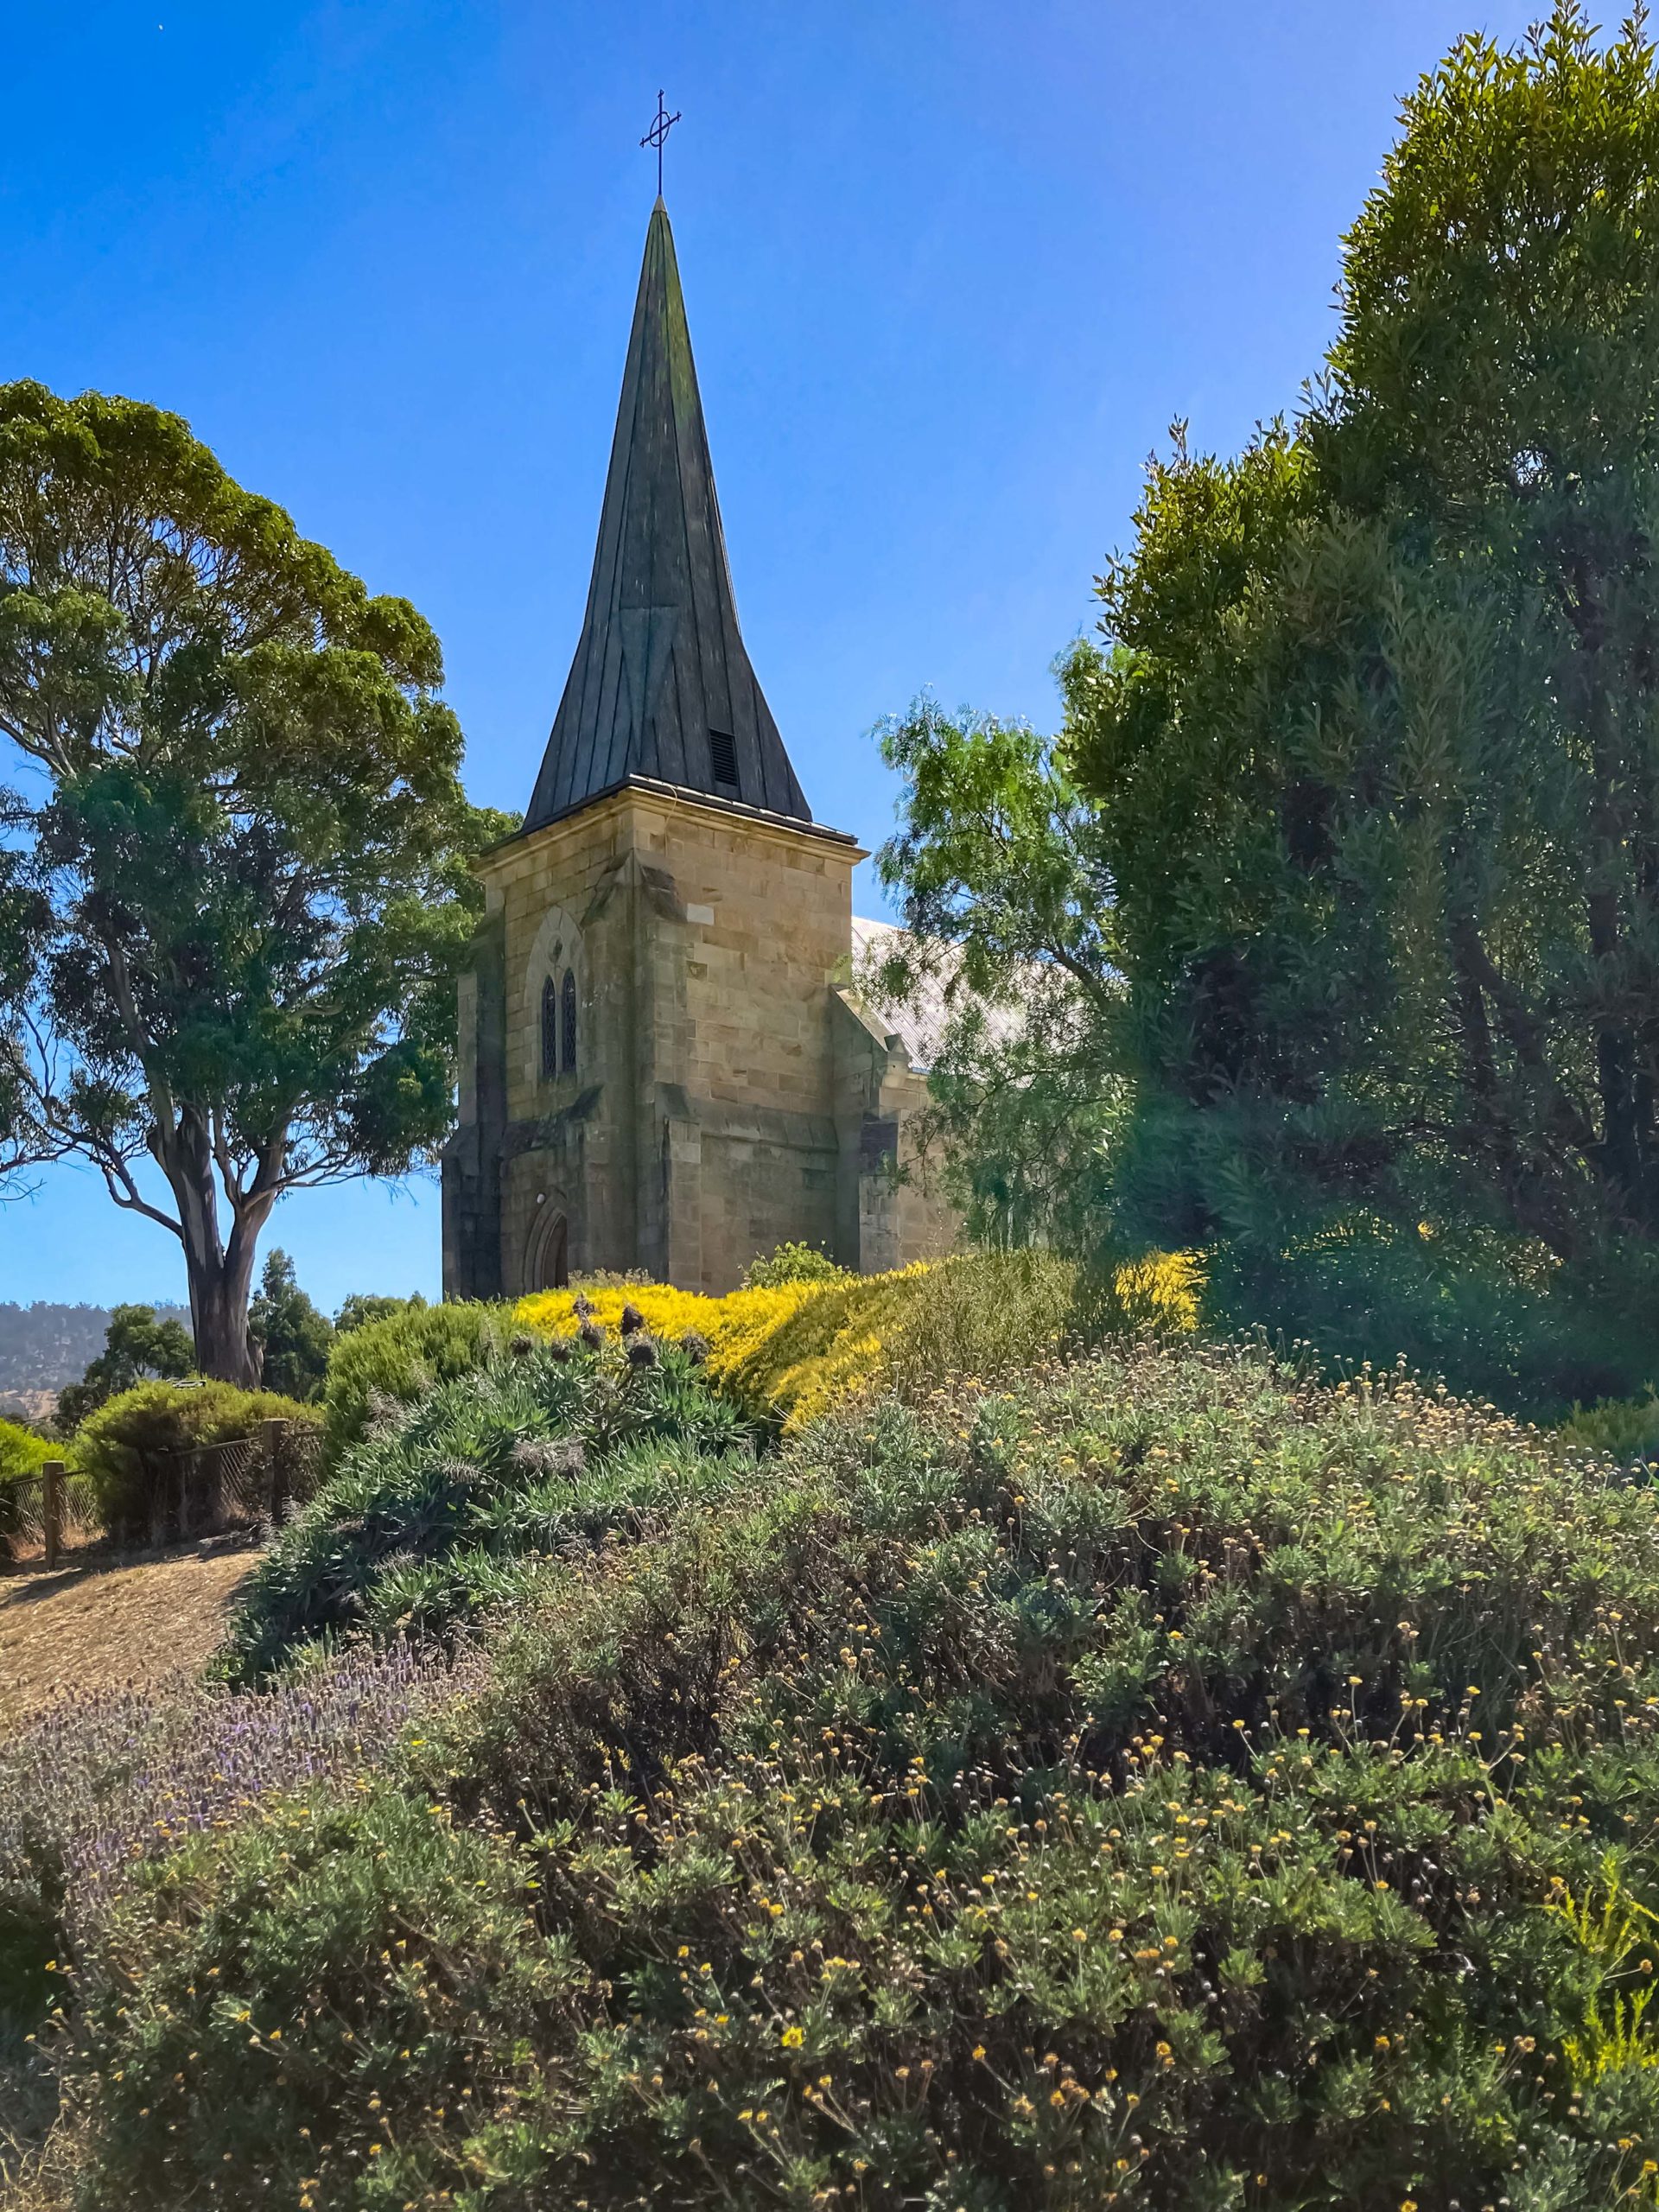 An old sandstone church surrounded by vegetation